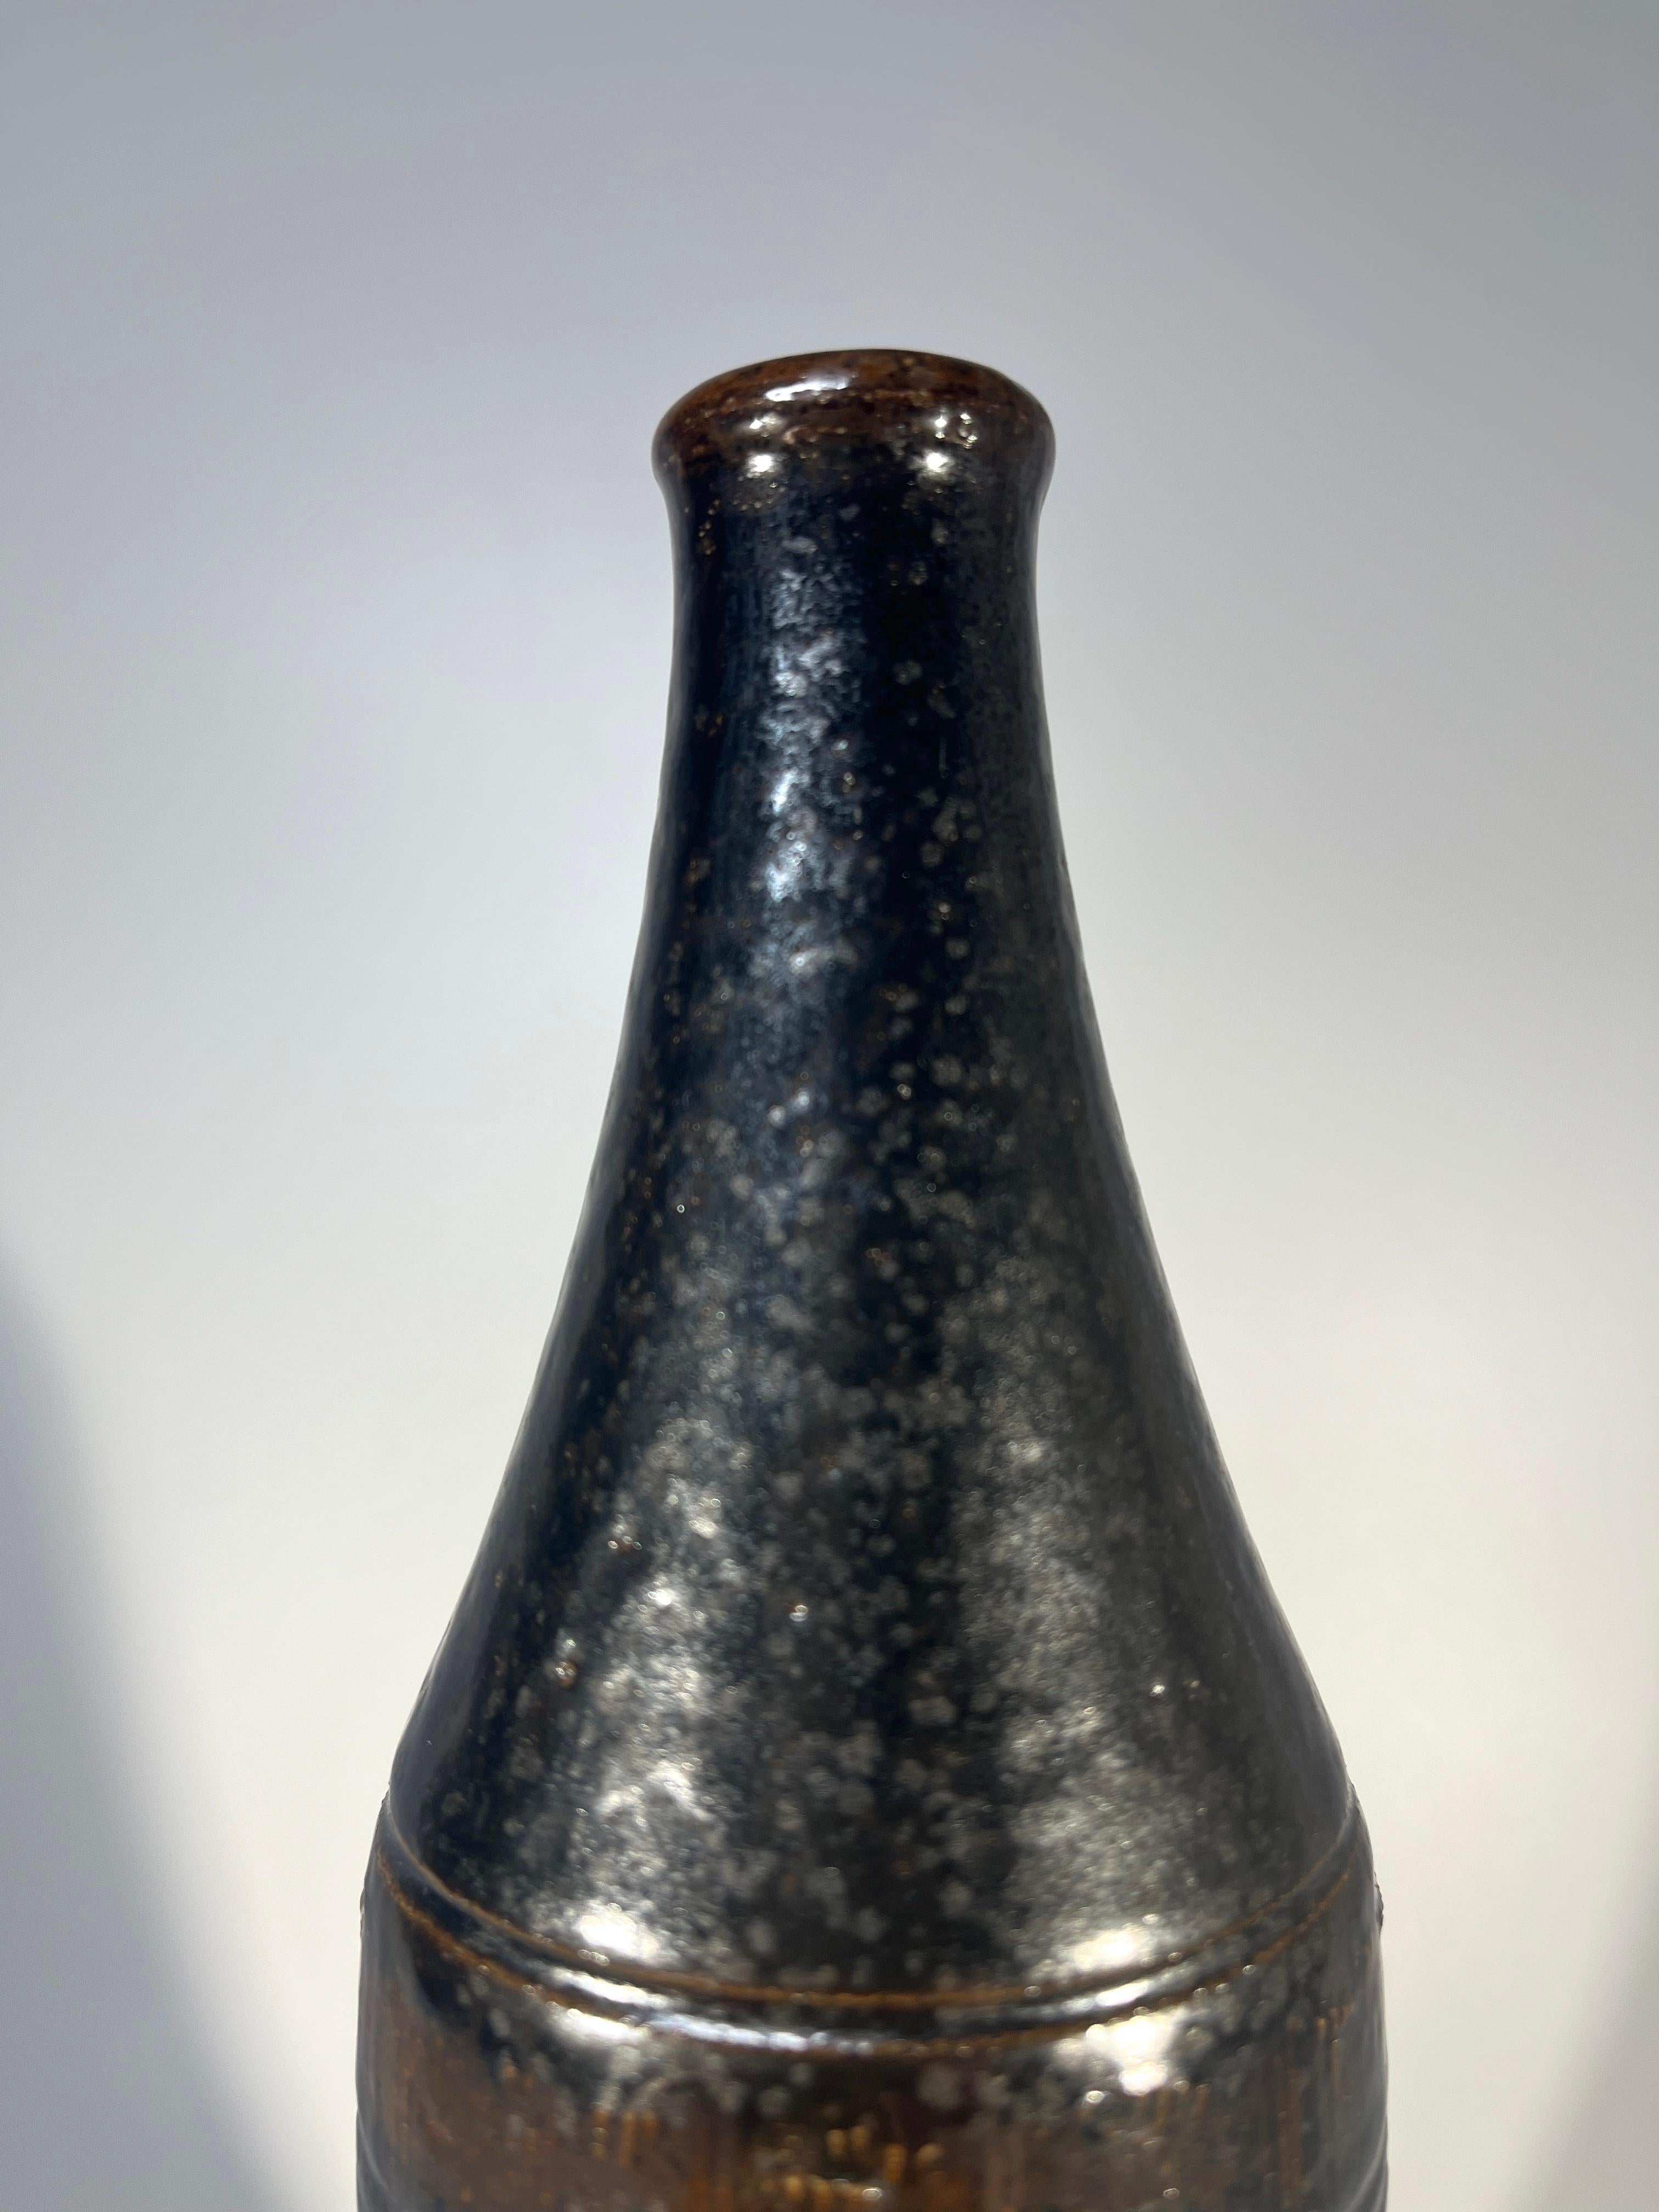 Arthur Andersson For Wallåkra, Sweden, Dark Intense Glazed Stoneware Bottle Vase In Excellent Condition For Sale In Rothley, Leicestershire